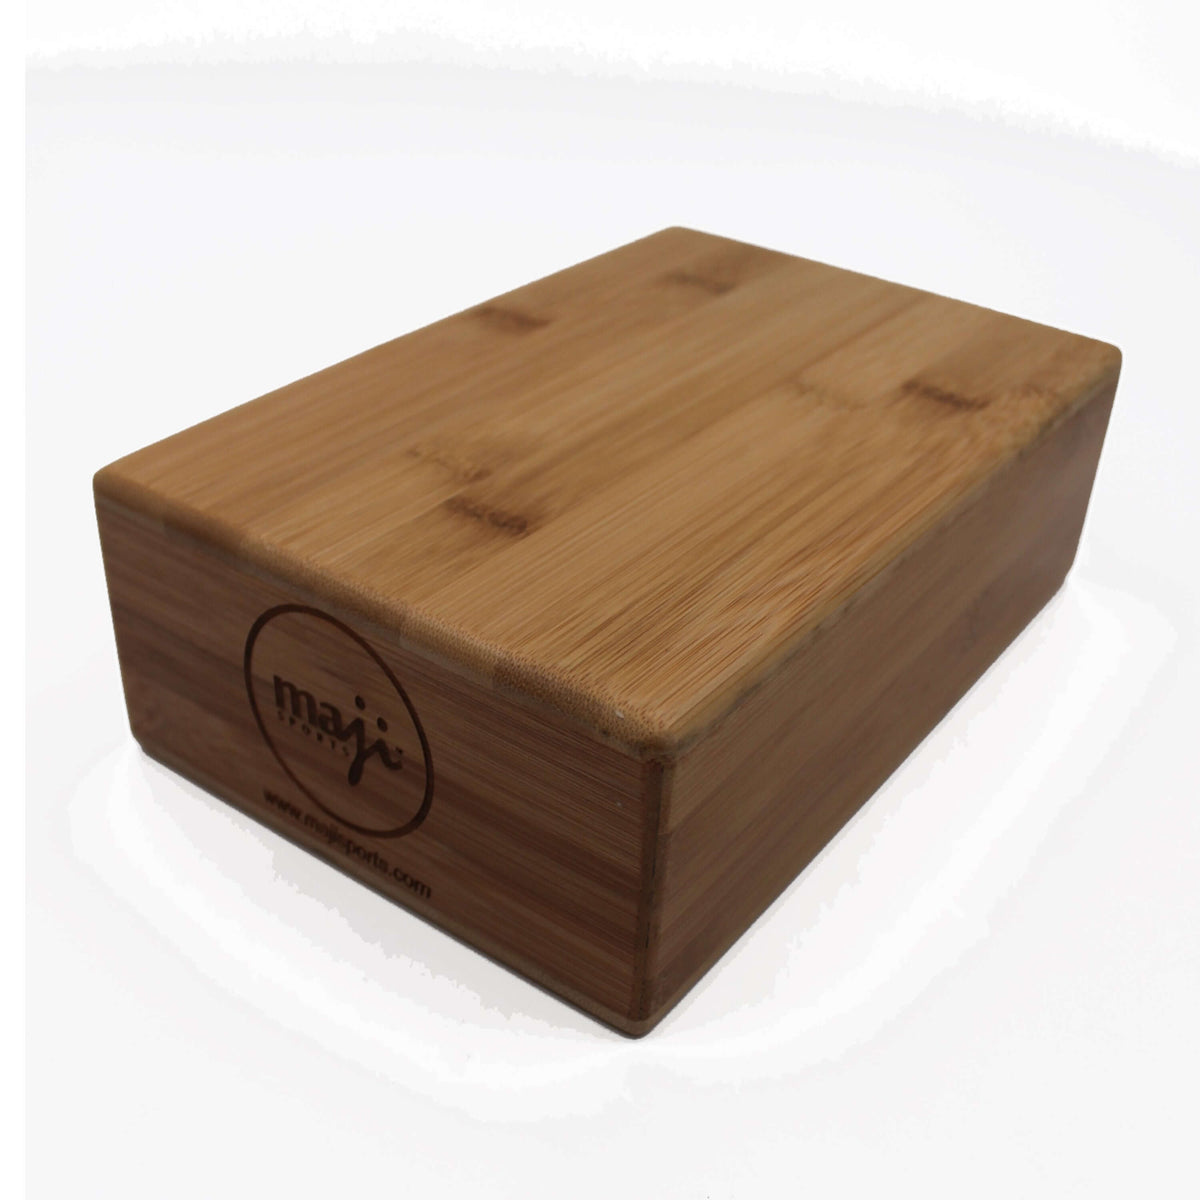 Carbonized Bamboo Yoga Block by Jupiter Gear